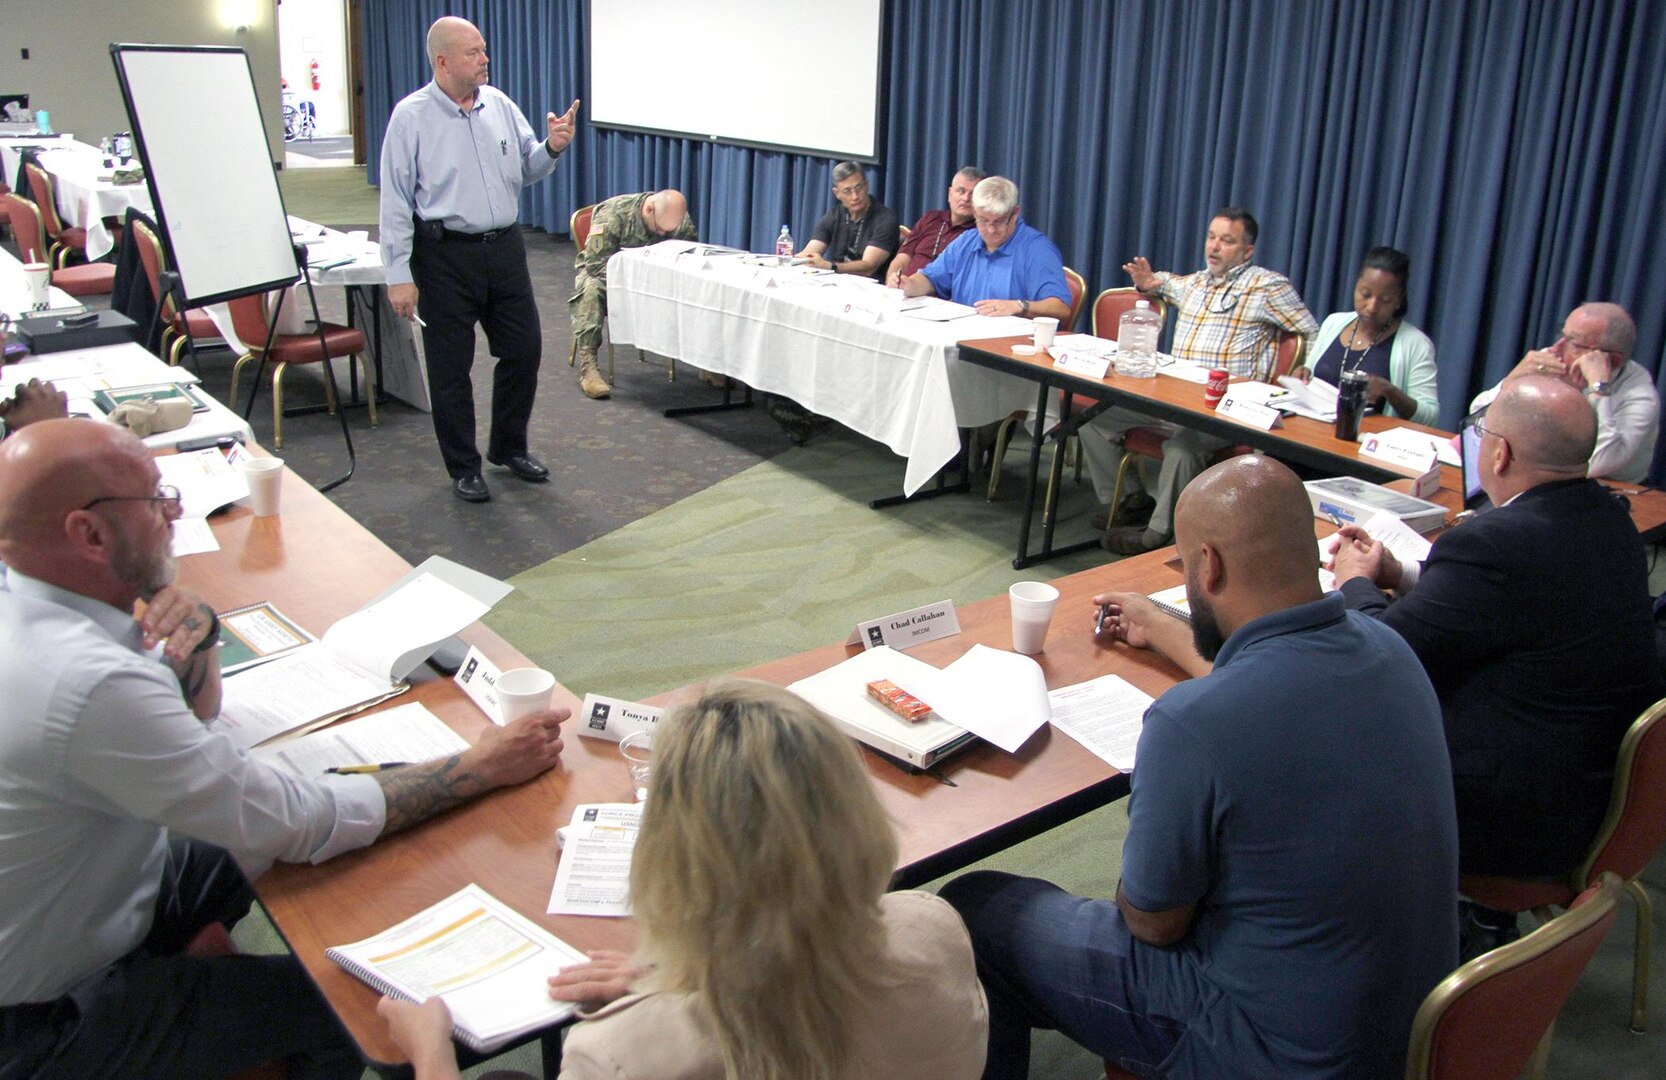 Force Protection officers participate in a table top discussion during a force protection and anti-terrorism workshop hosted by U.S. Army North at the Fort Sam Houston Community Center at Joint Base San Antonio-Fort Sam Houston July 25-28. More than 60 force protection personnel from 21 commands, including Air Force, Navy and Marines attended the week-long workshop to discuss changes and improvements. The workshop brought force protection leaders from other installations together to discuss current trends and future strategies on improved methods and changes for security of Army facilities, Soldiers and their families and Department of Defense civilians.  